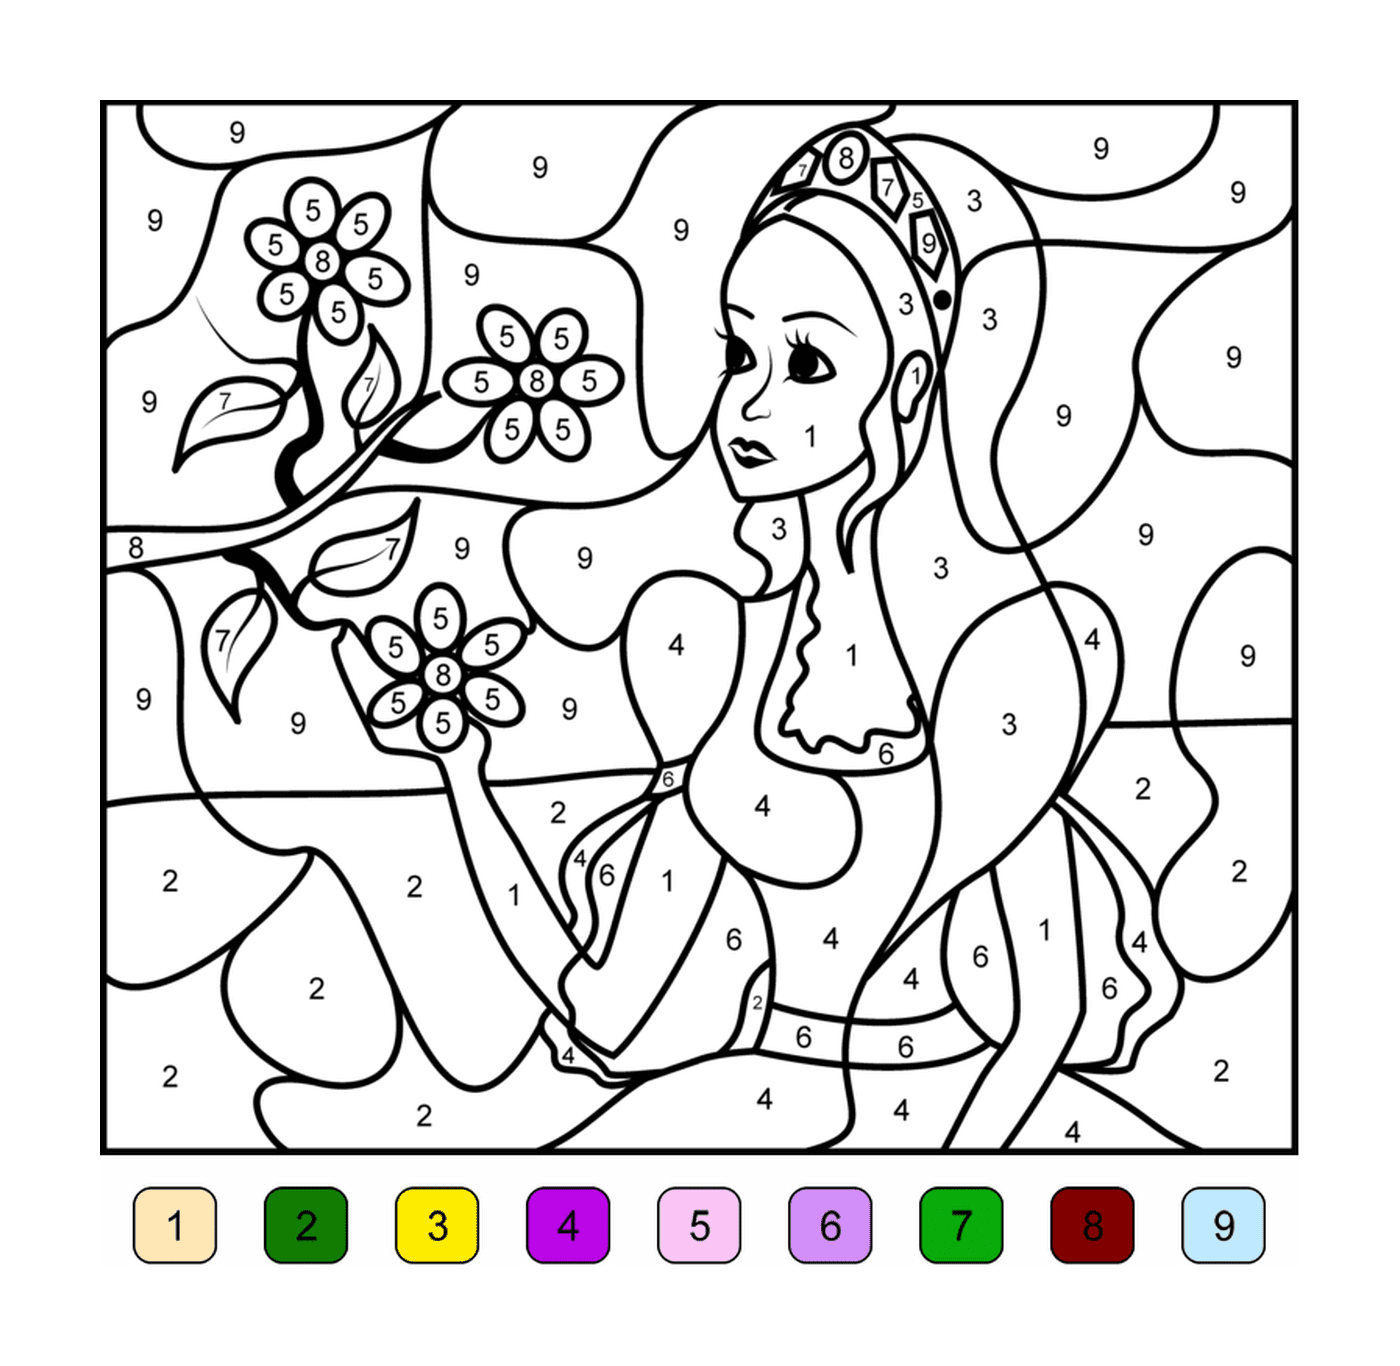  A woman with a bouquet of flowers coloring by number 